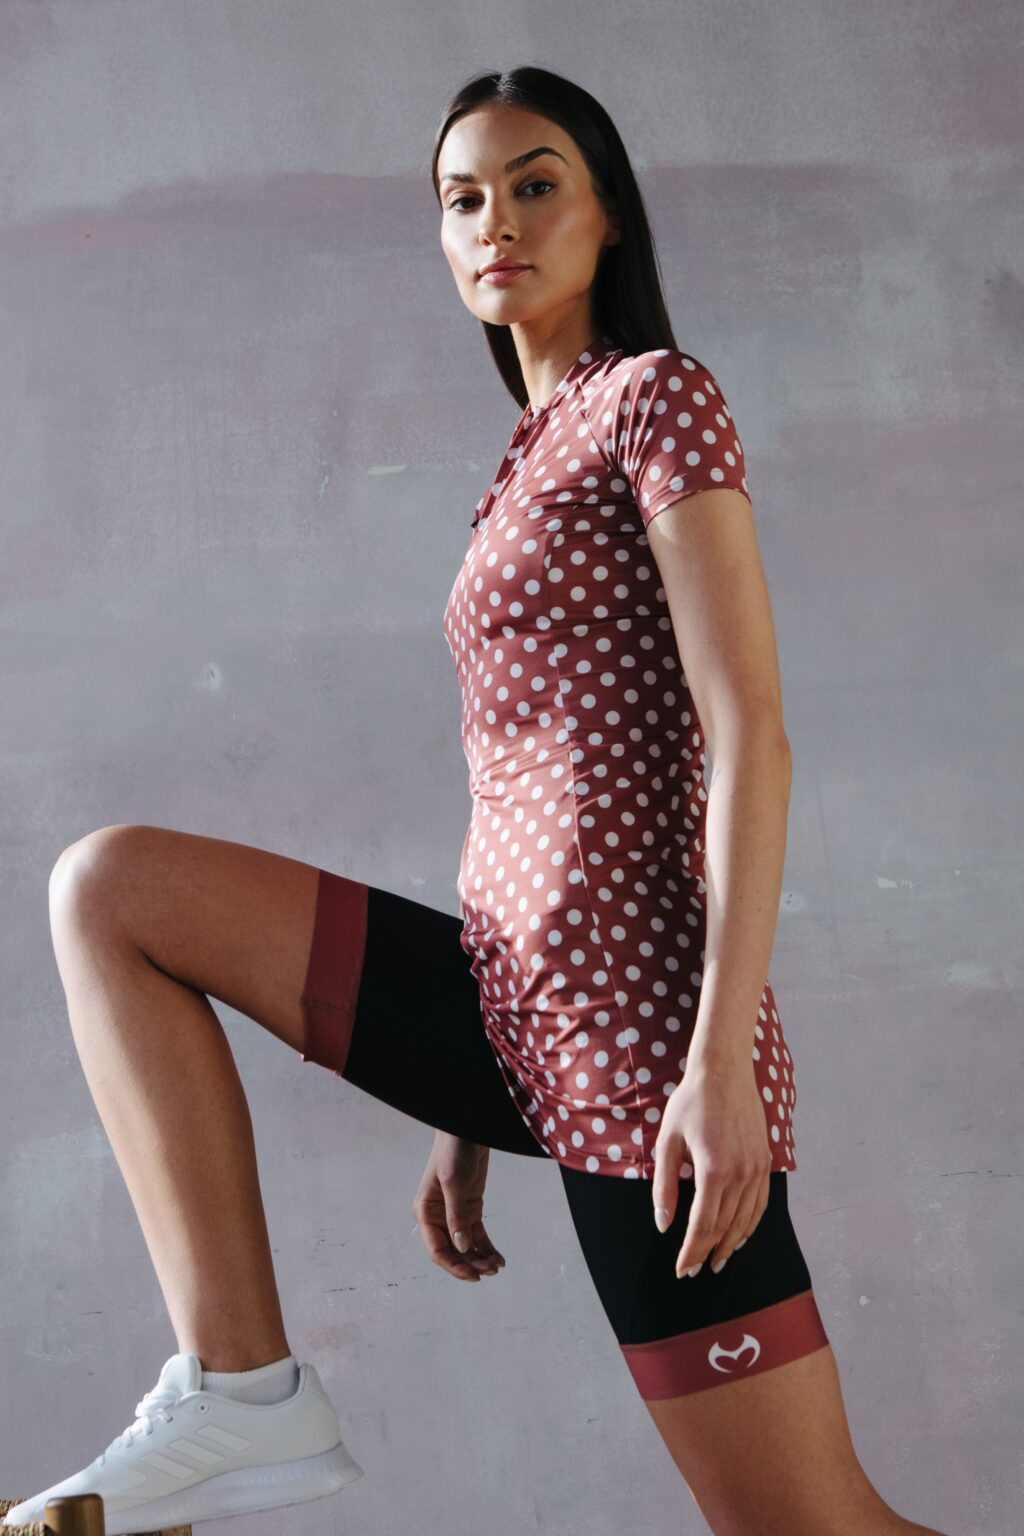 A model in a sporty brown dress with white polka dots, fastened with a zipper.